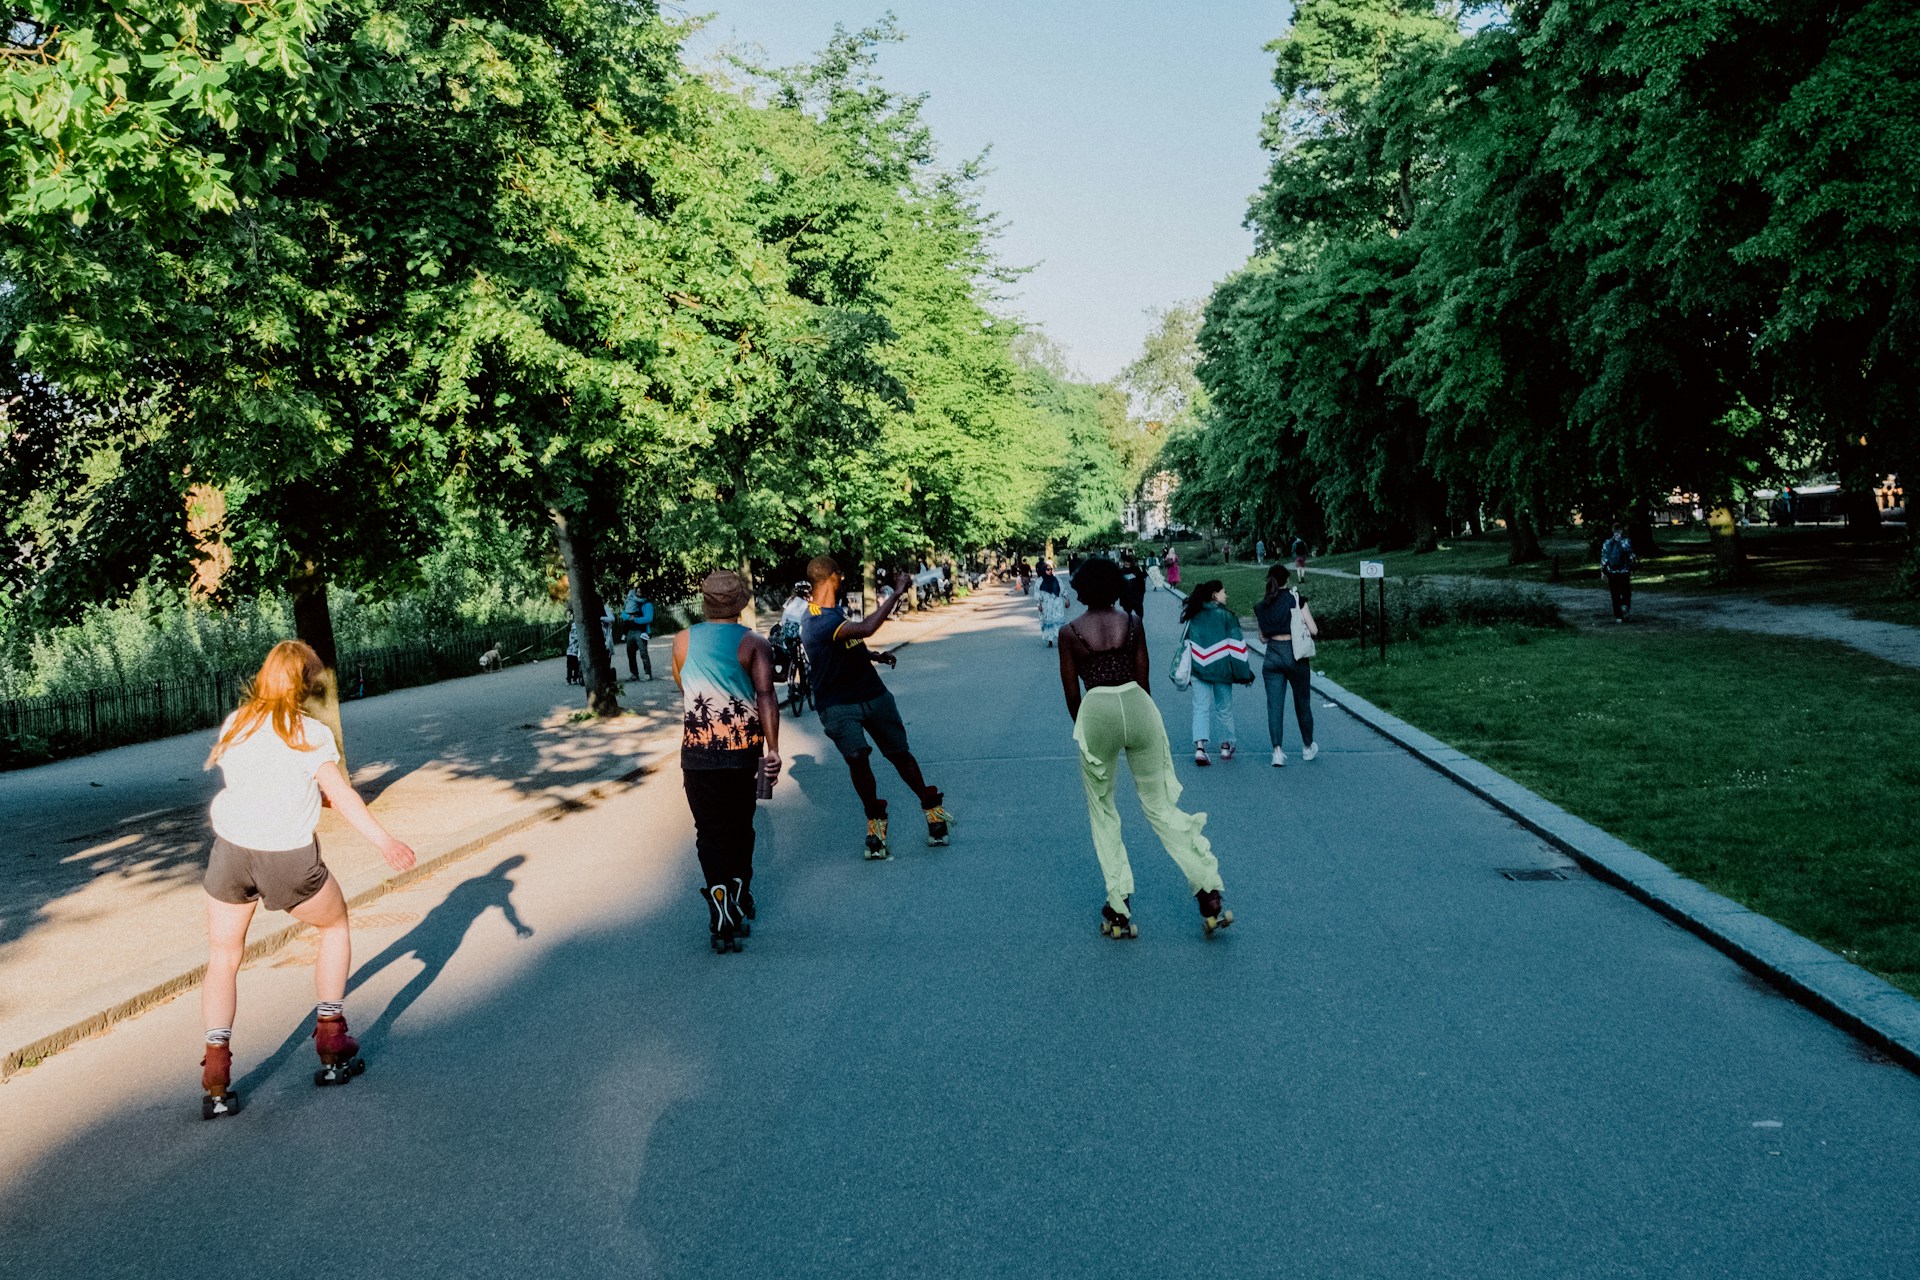 A group of people roller skating through a park